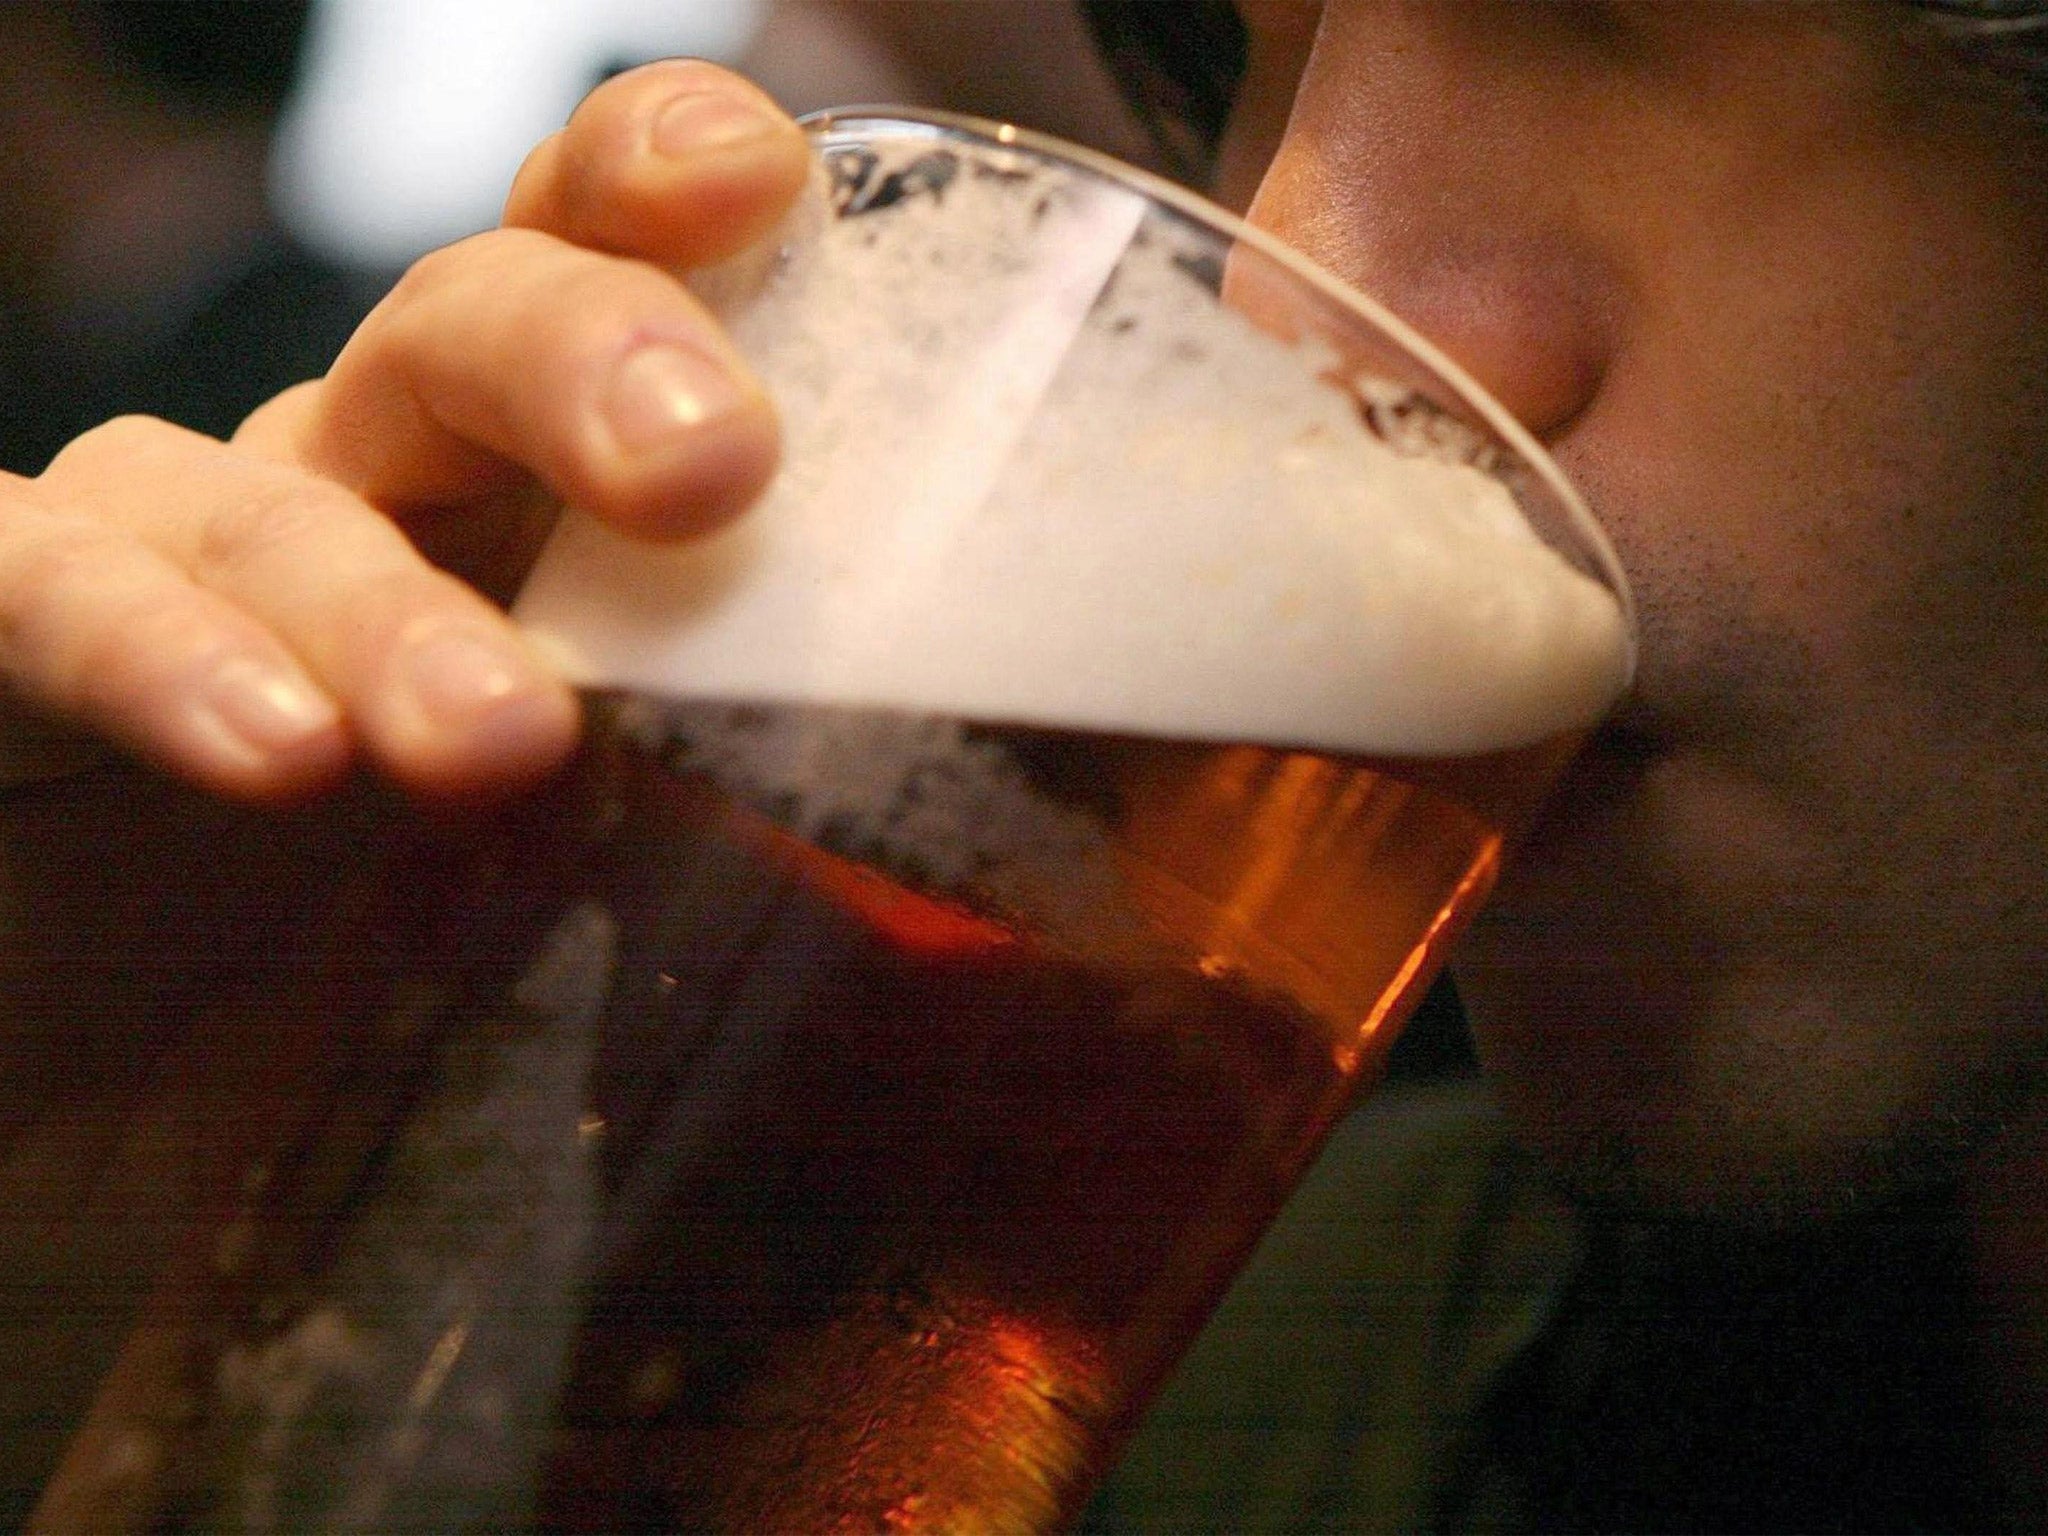 The age of 25 seems to be the most prolific for binge drinking